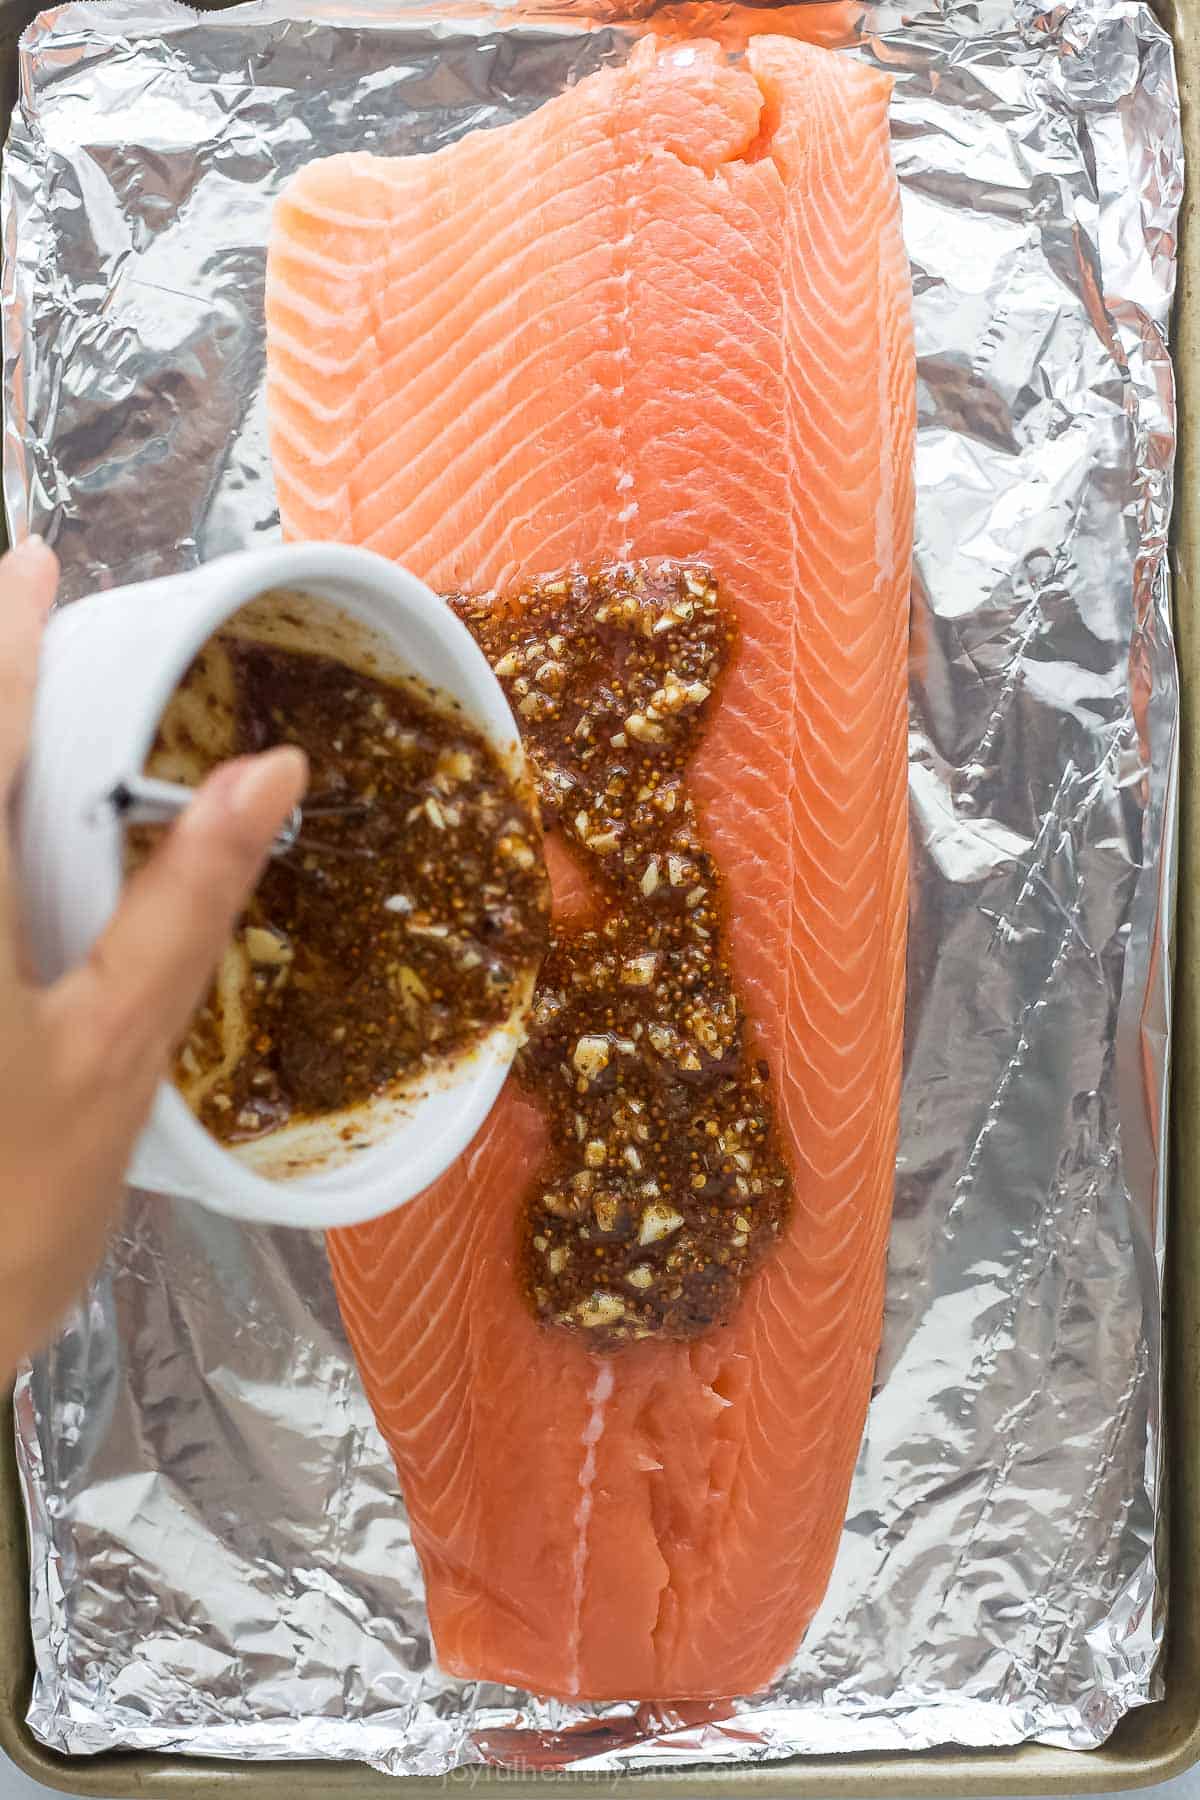 Pouring the sauce over the salmon.